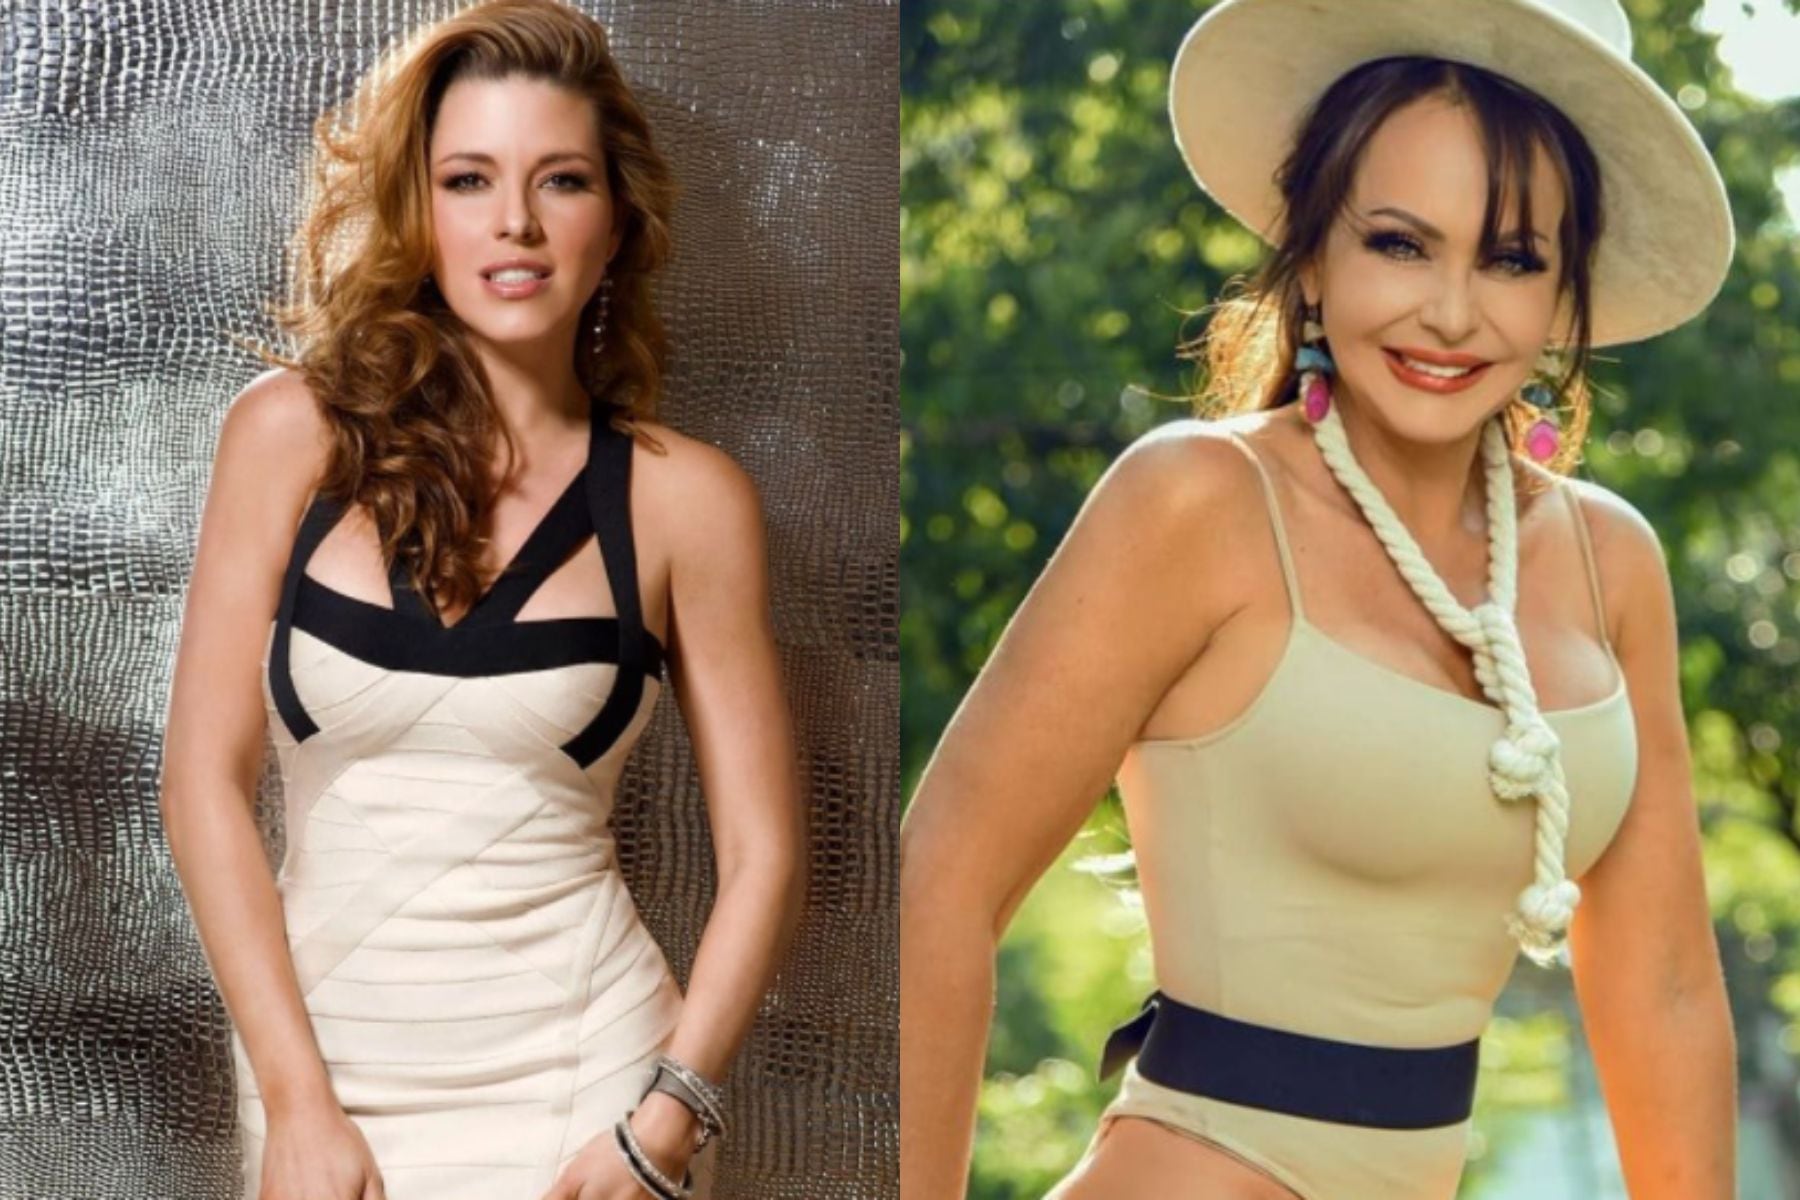 Alicia Machado broke the silence about her former friendship with Gaby Spanic